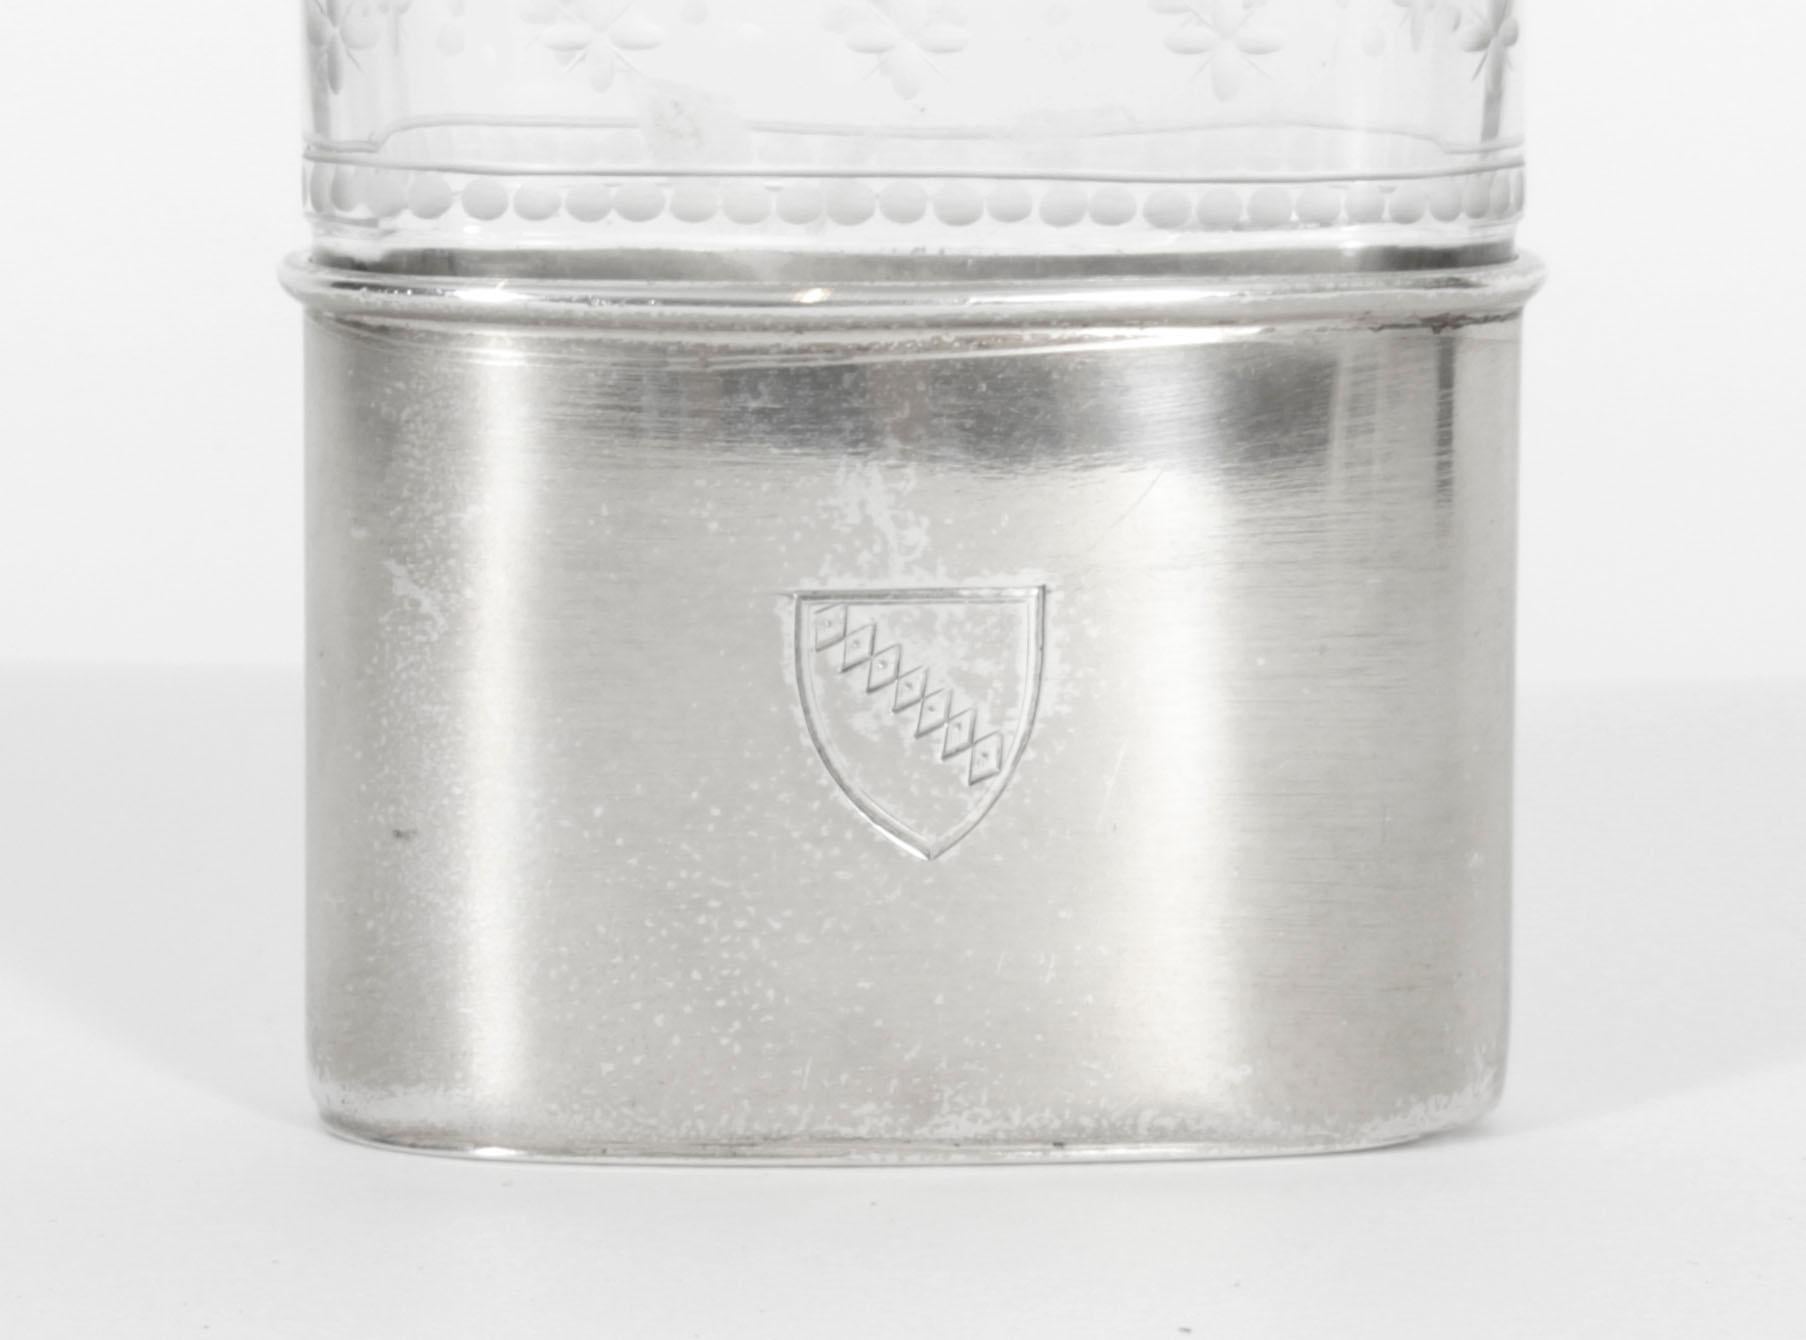 A truly superb antique Victorian sterling silver and cut crystal glass hip flask - hallmarked London 1867 and the retailers mark for Jenner, of St. James's London.
 
The glass has beautiful engraved decoration.
 
An excellent gift idea for many